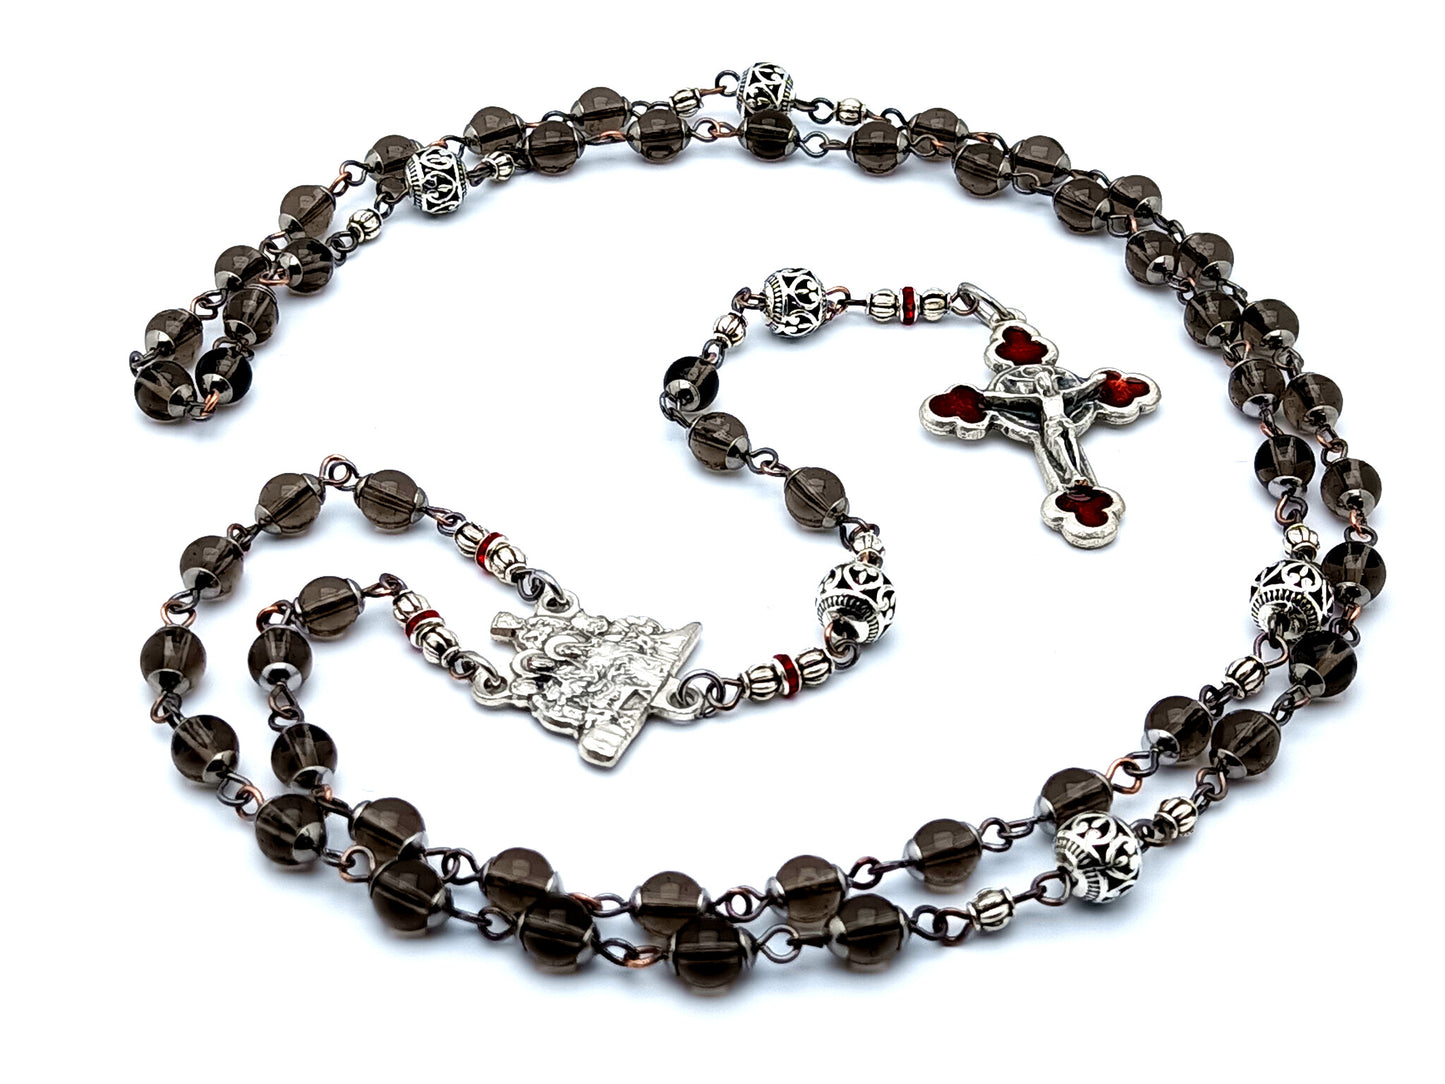 The Nativity of Baby Jesus unique rosary beads with Tibetan silver and glass beads and red enamel rose crucifix.